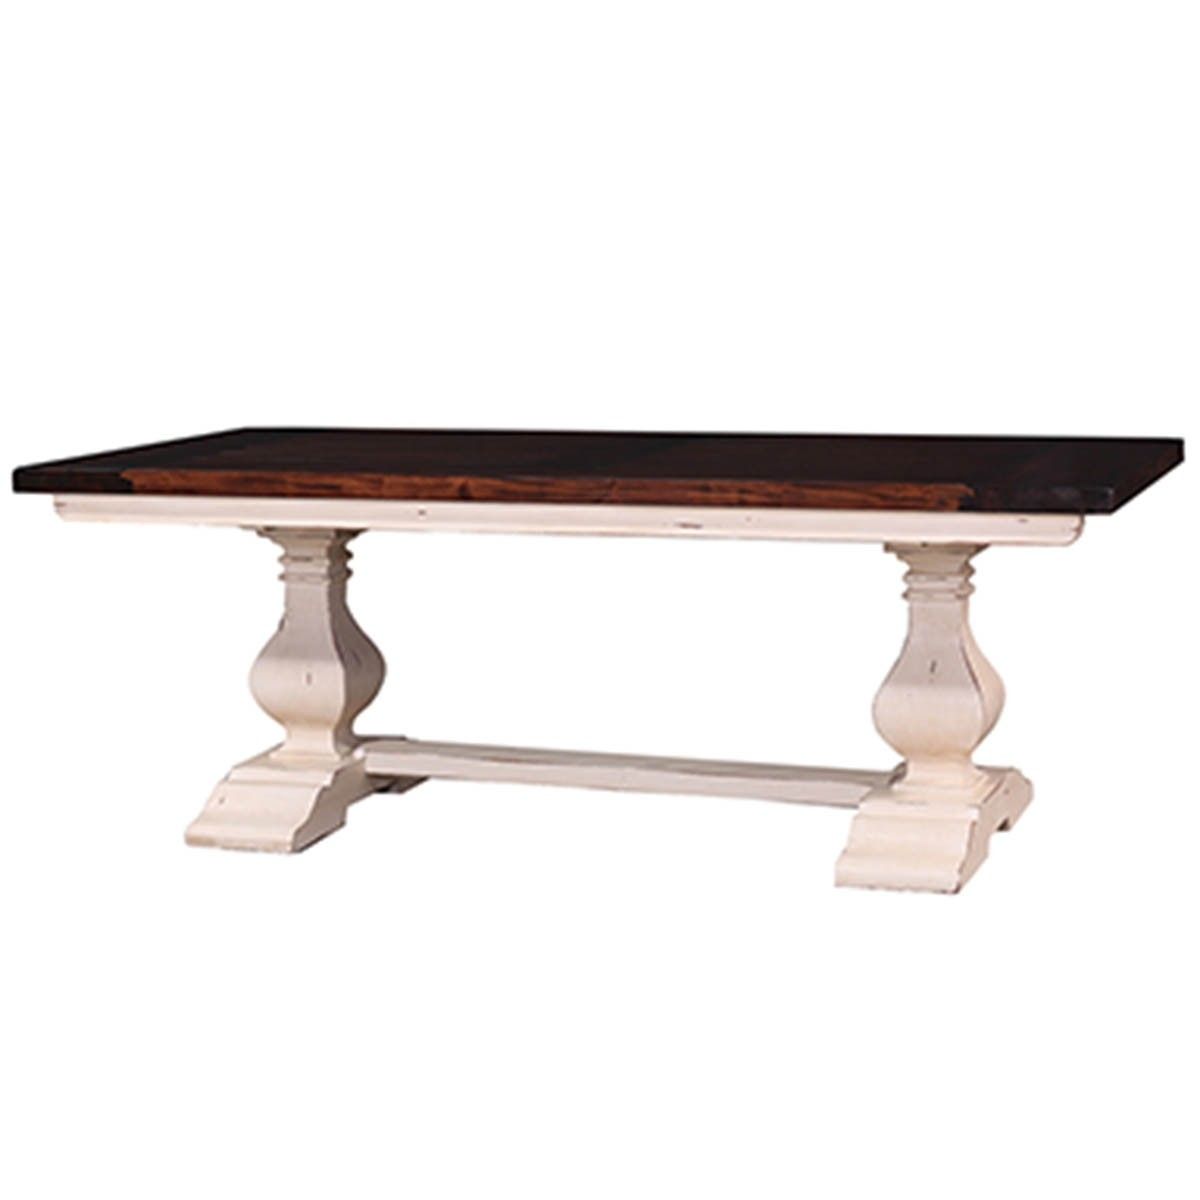 Trestle Dining Table Pertaining To Most Up To Date Kara Trestle Dining Tables (View 7 of 15)